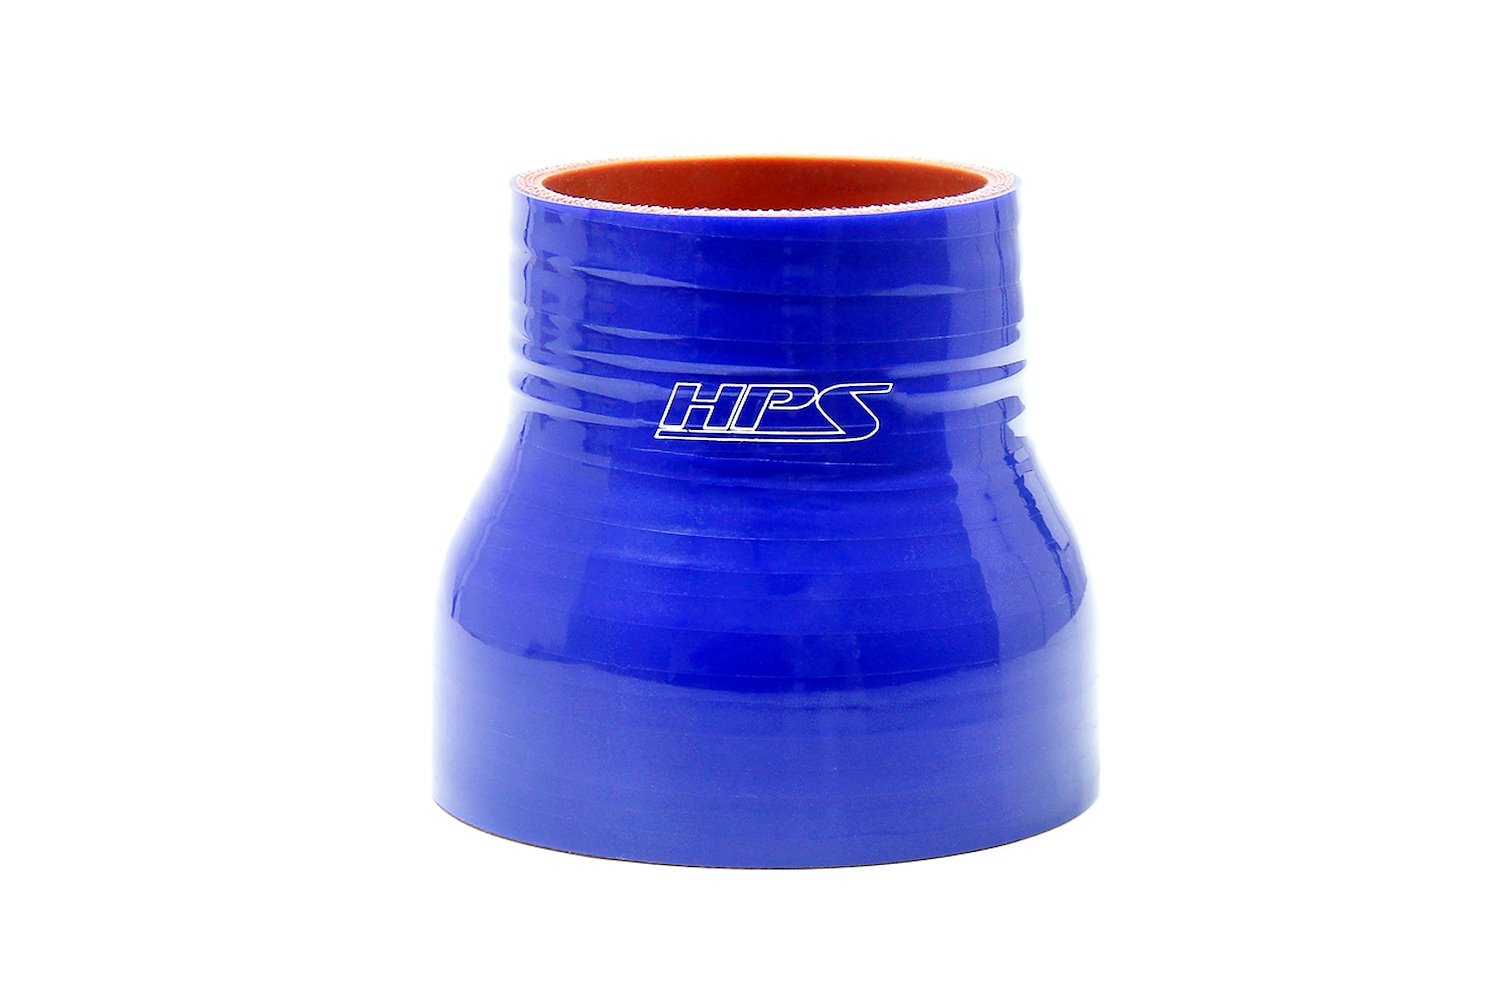 HTSR-300-350-BLUE Silicone Reducer Hose, High-Temp 4-Ply Reinforced, 3 in. - 3-1/2 in. ID, 3 in. Long, Blue